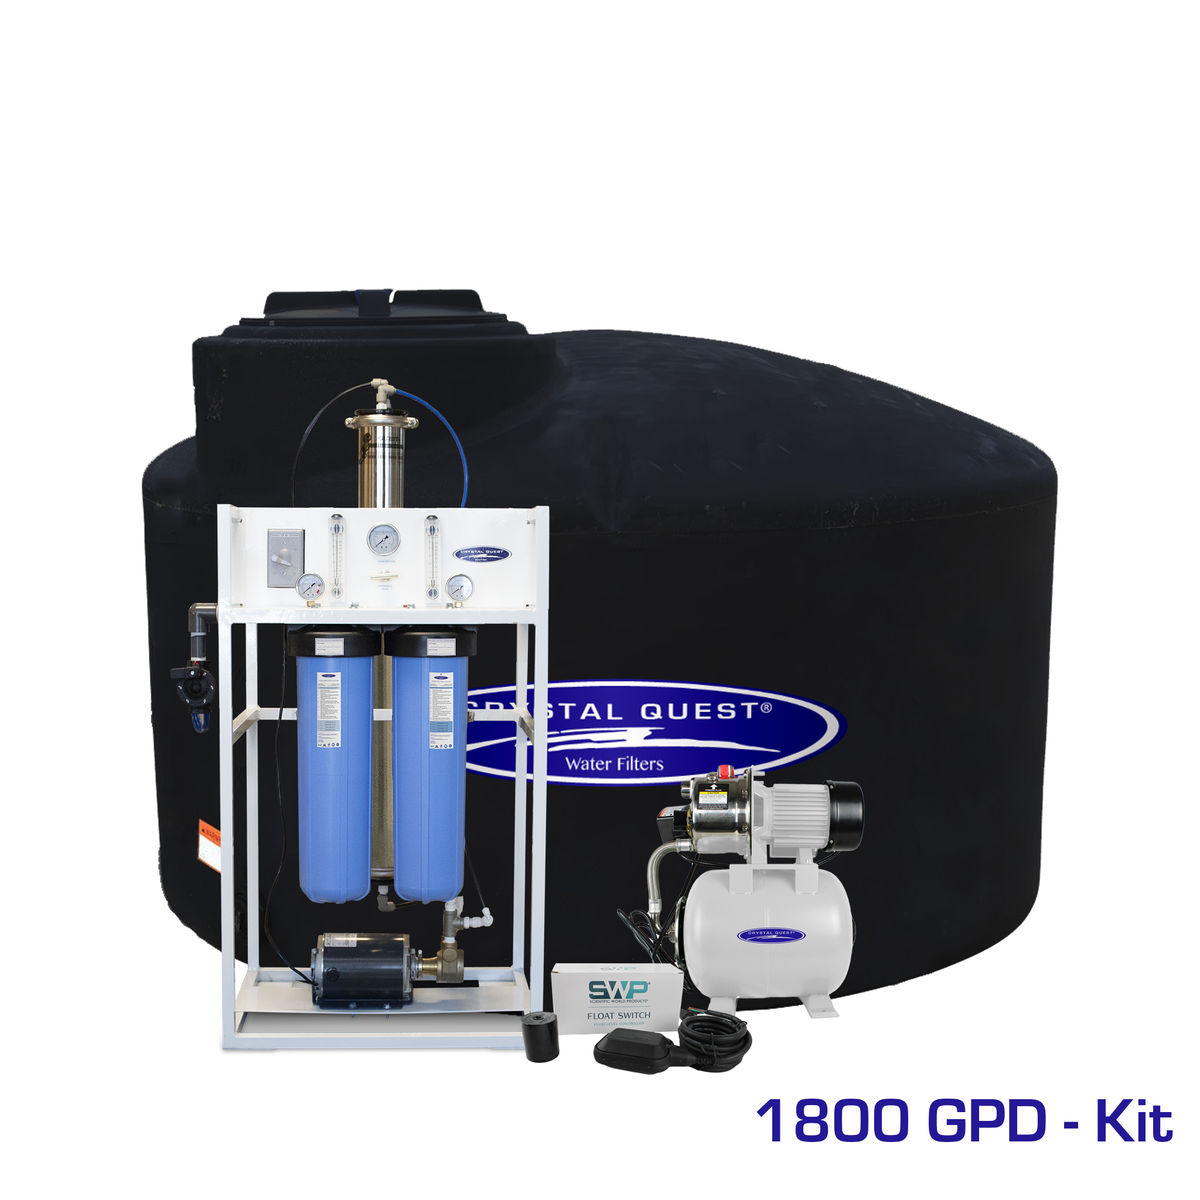 1,800 GPD / Add Storage Tank Kit (550 Gal) Commercial Mid-Flow Reverse Osmosis System (500-7000 GPD) - Commercial - Crystal Quest